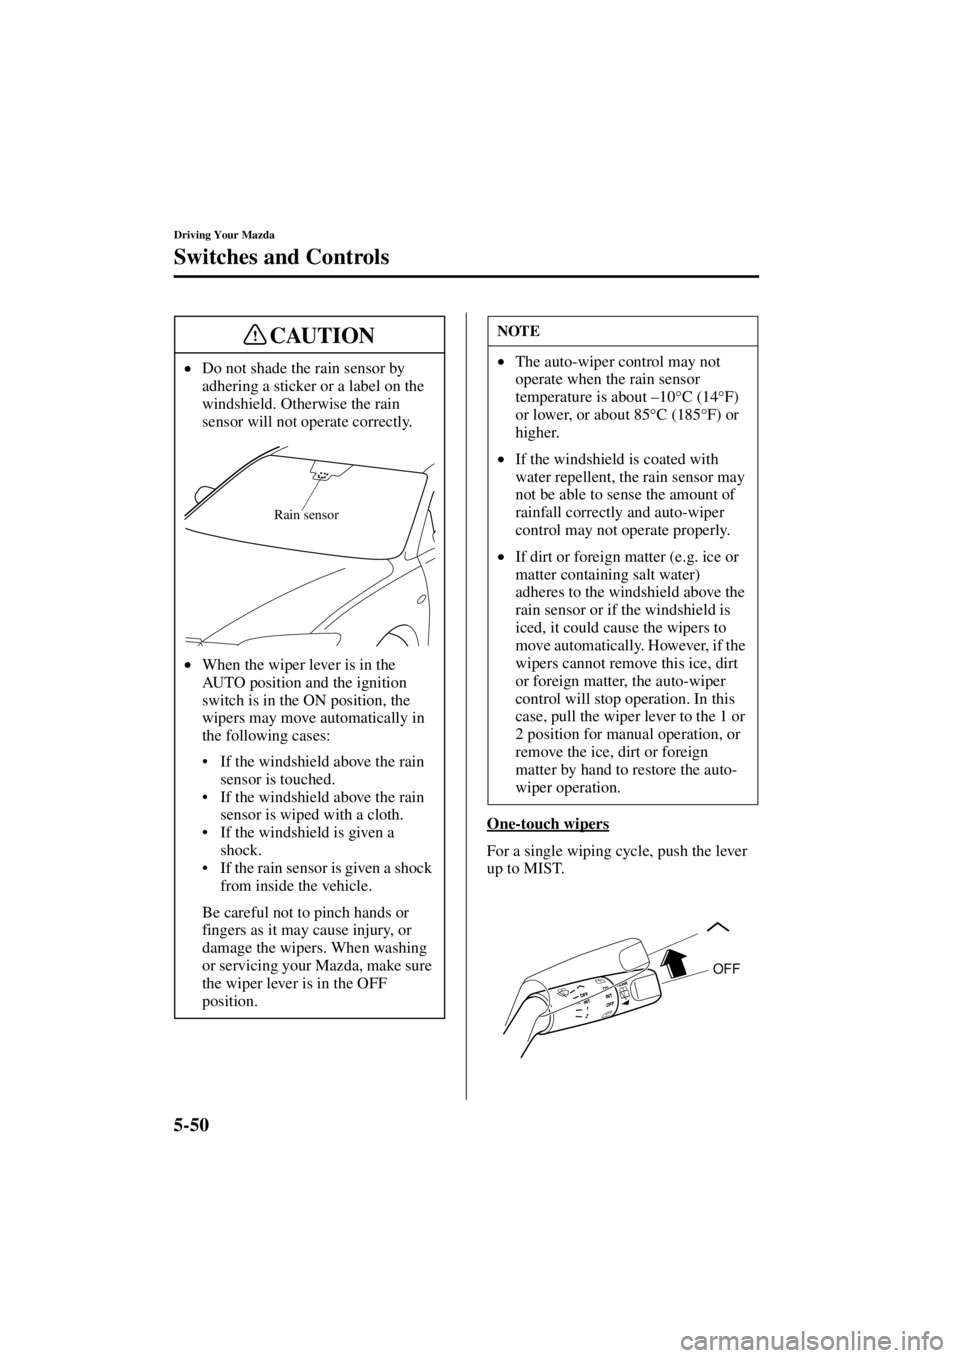 MAZDA MODEL 3 4-DOOR 2004  Owners Manual 5-50
Driving Your Mazda
Switches and Controls
Form No. 8S18-EA-03I
One-touch wipers
For a single wiping cycle, push the lever 
up to MIST.
•
Do not shade the rain sensor by 
adhering a sticker or a 